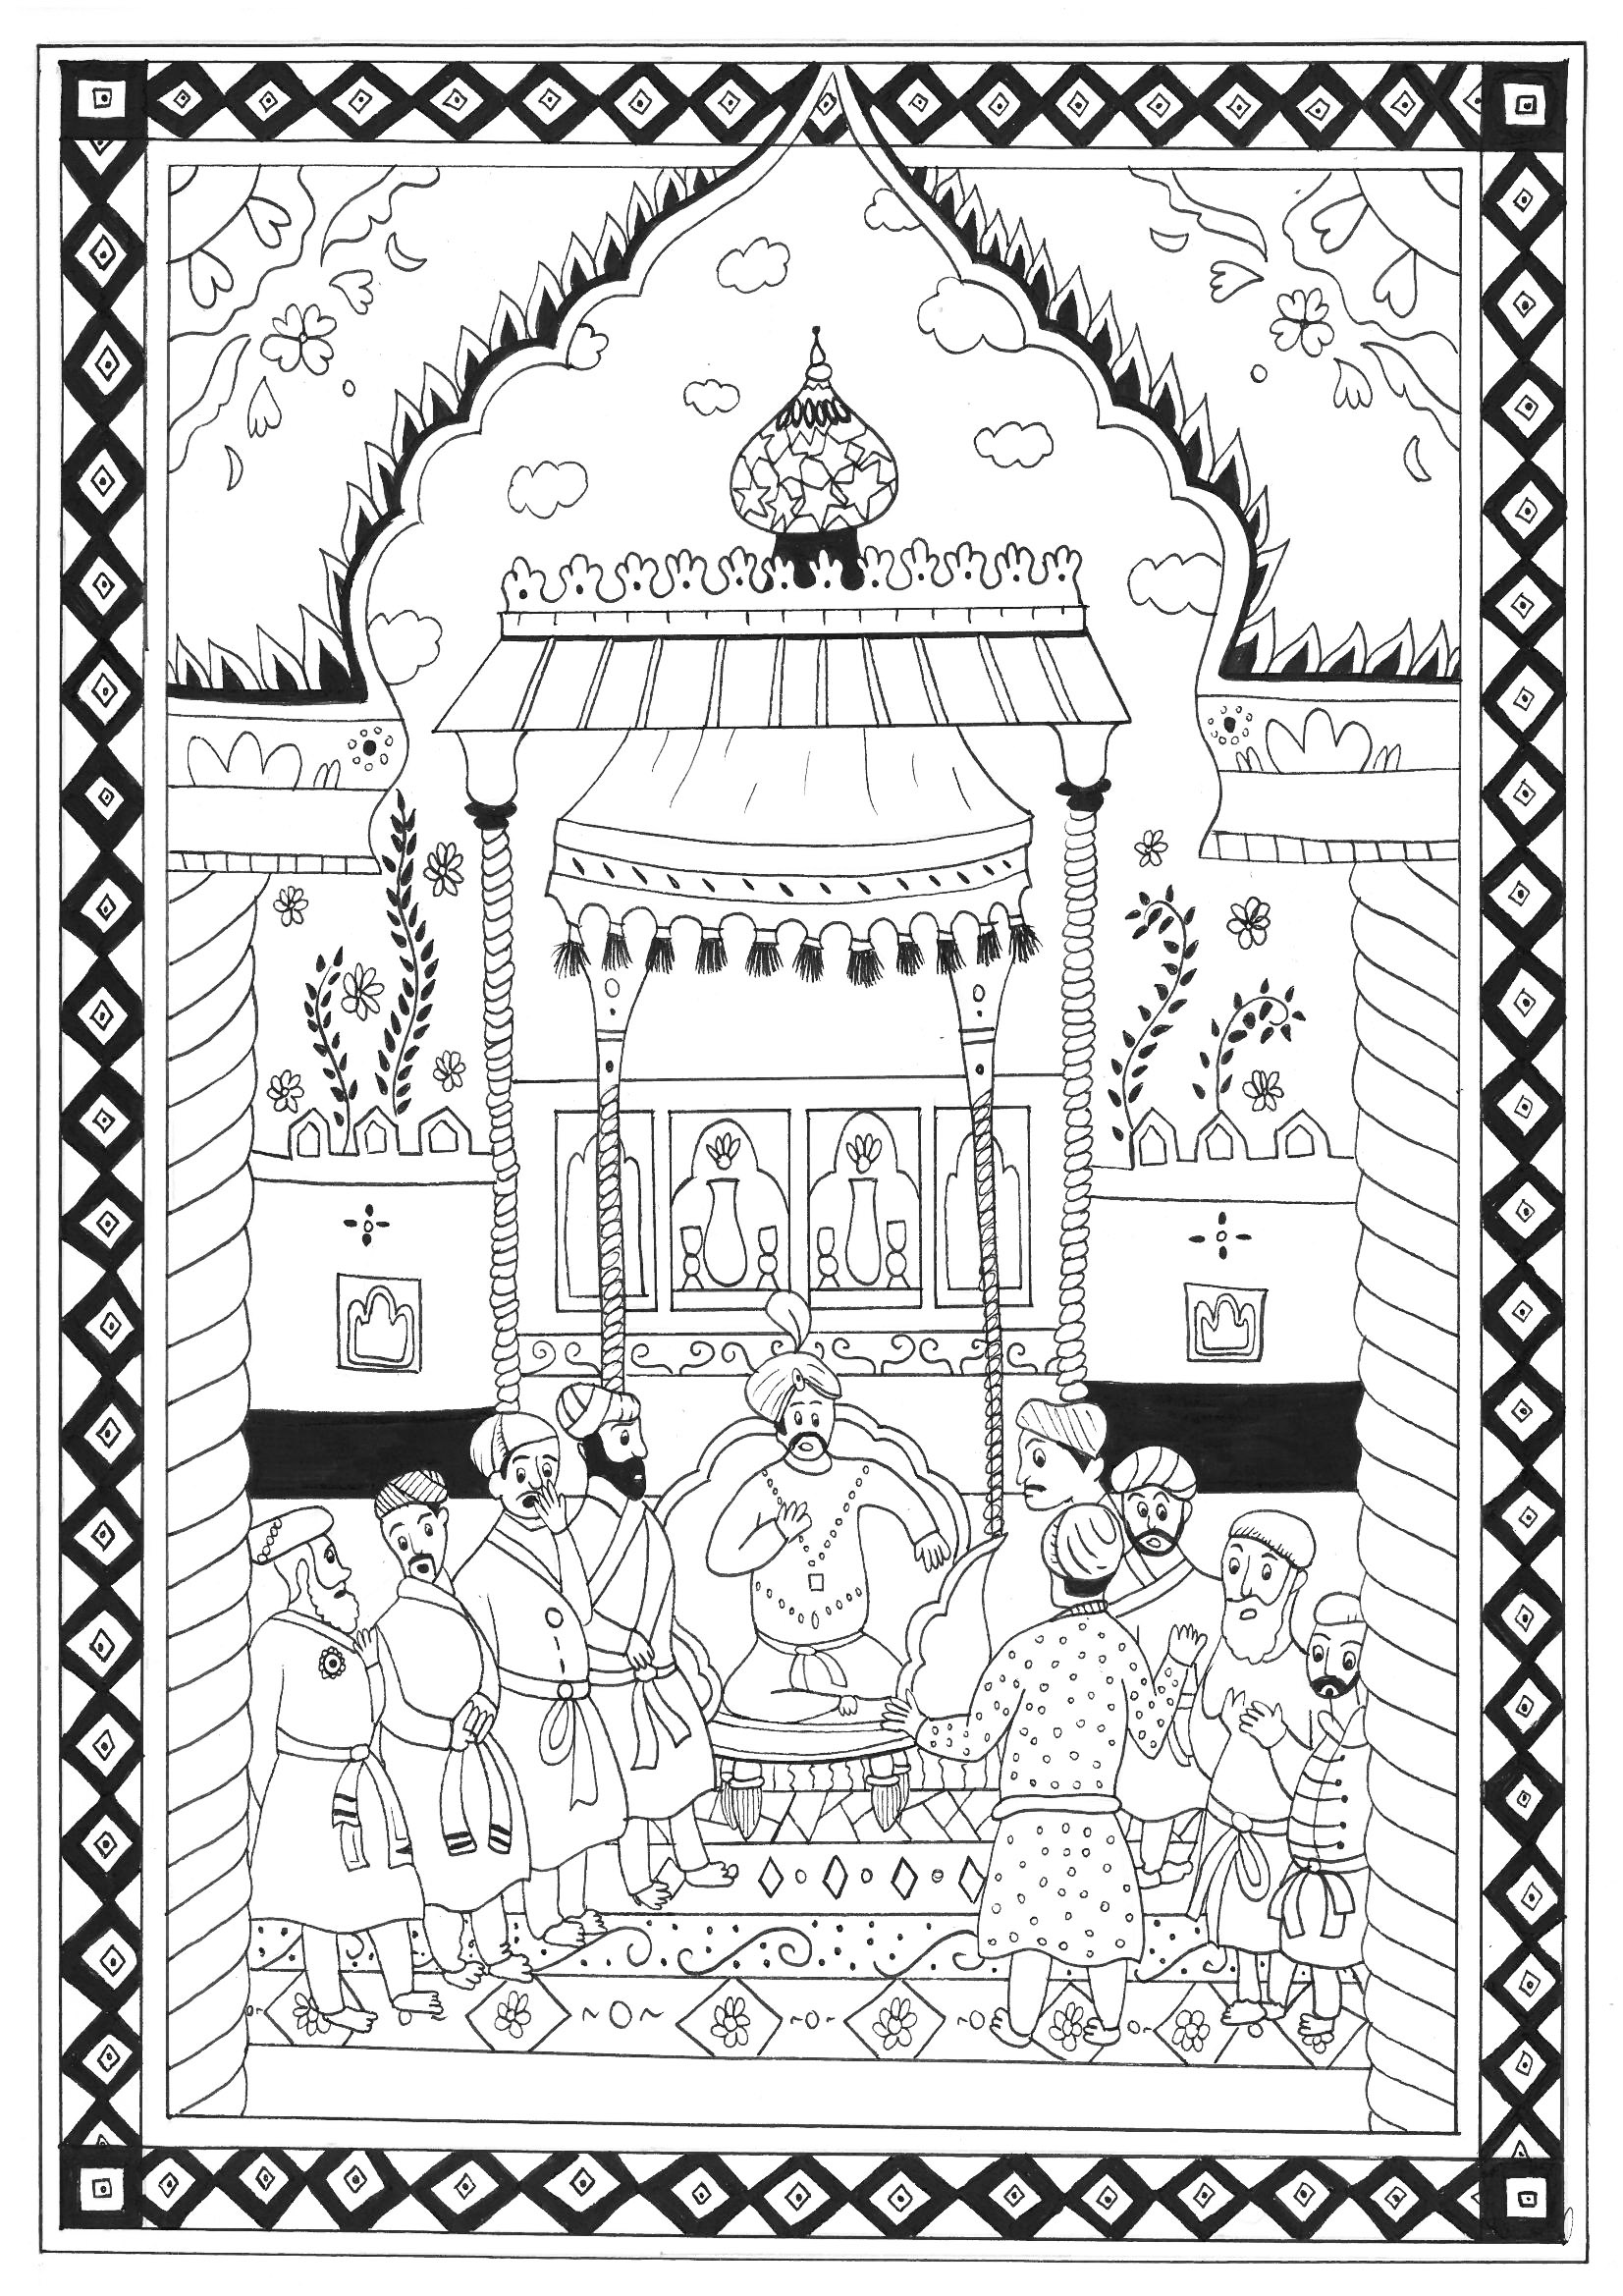 Several Maharajas in an oriental palace. The work 'One Thousand and One Nights' was collected over many centuries by various authors, translators, and scholars across West, Central, and South Asia and North Africa. The tales themselves trace their roots back to ancient and medieval Arabic, Persian, Mesopotamian, Indian, and Egyptian folklore and literature.